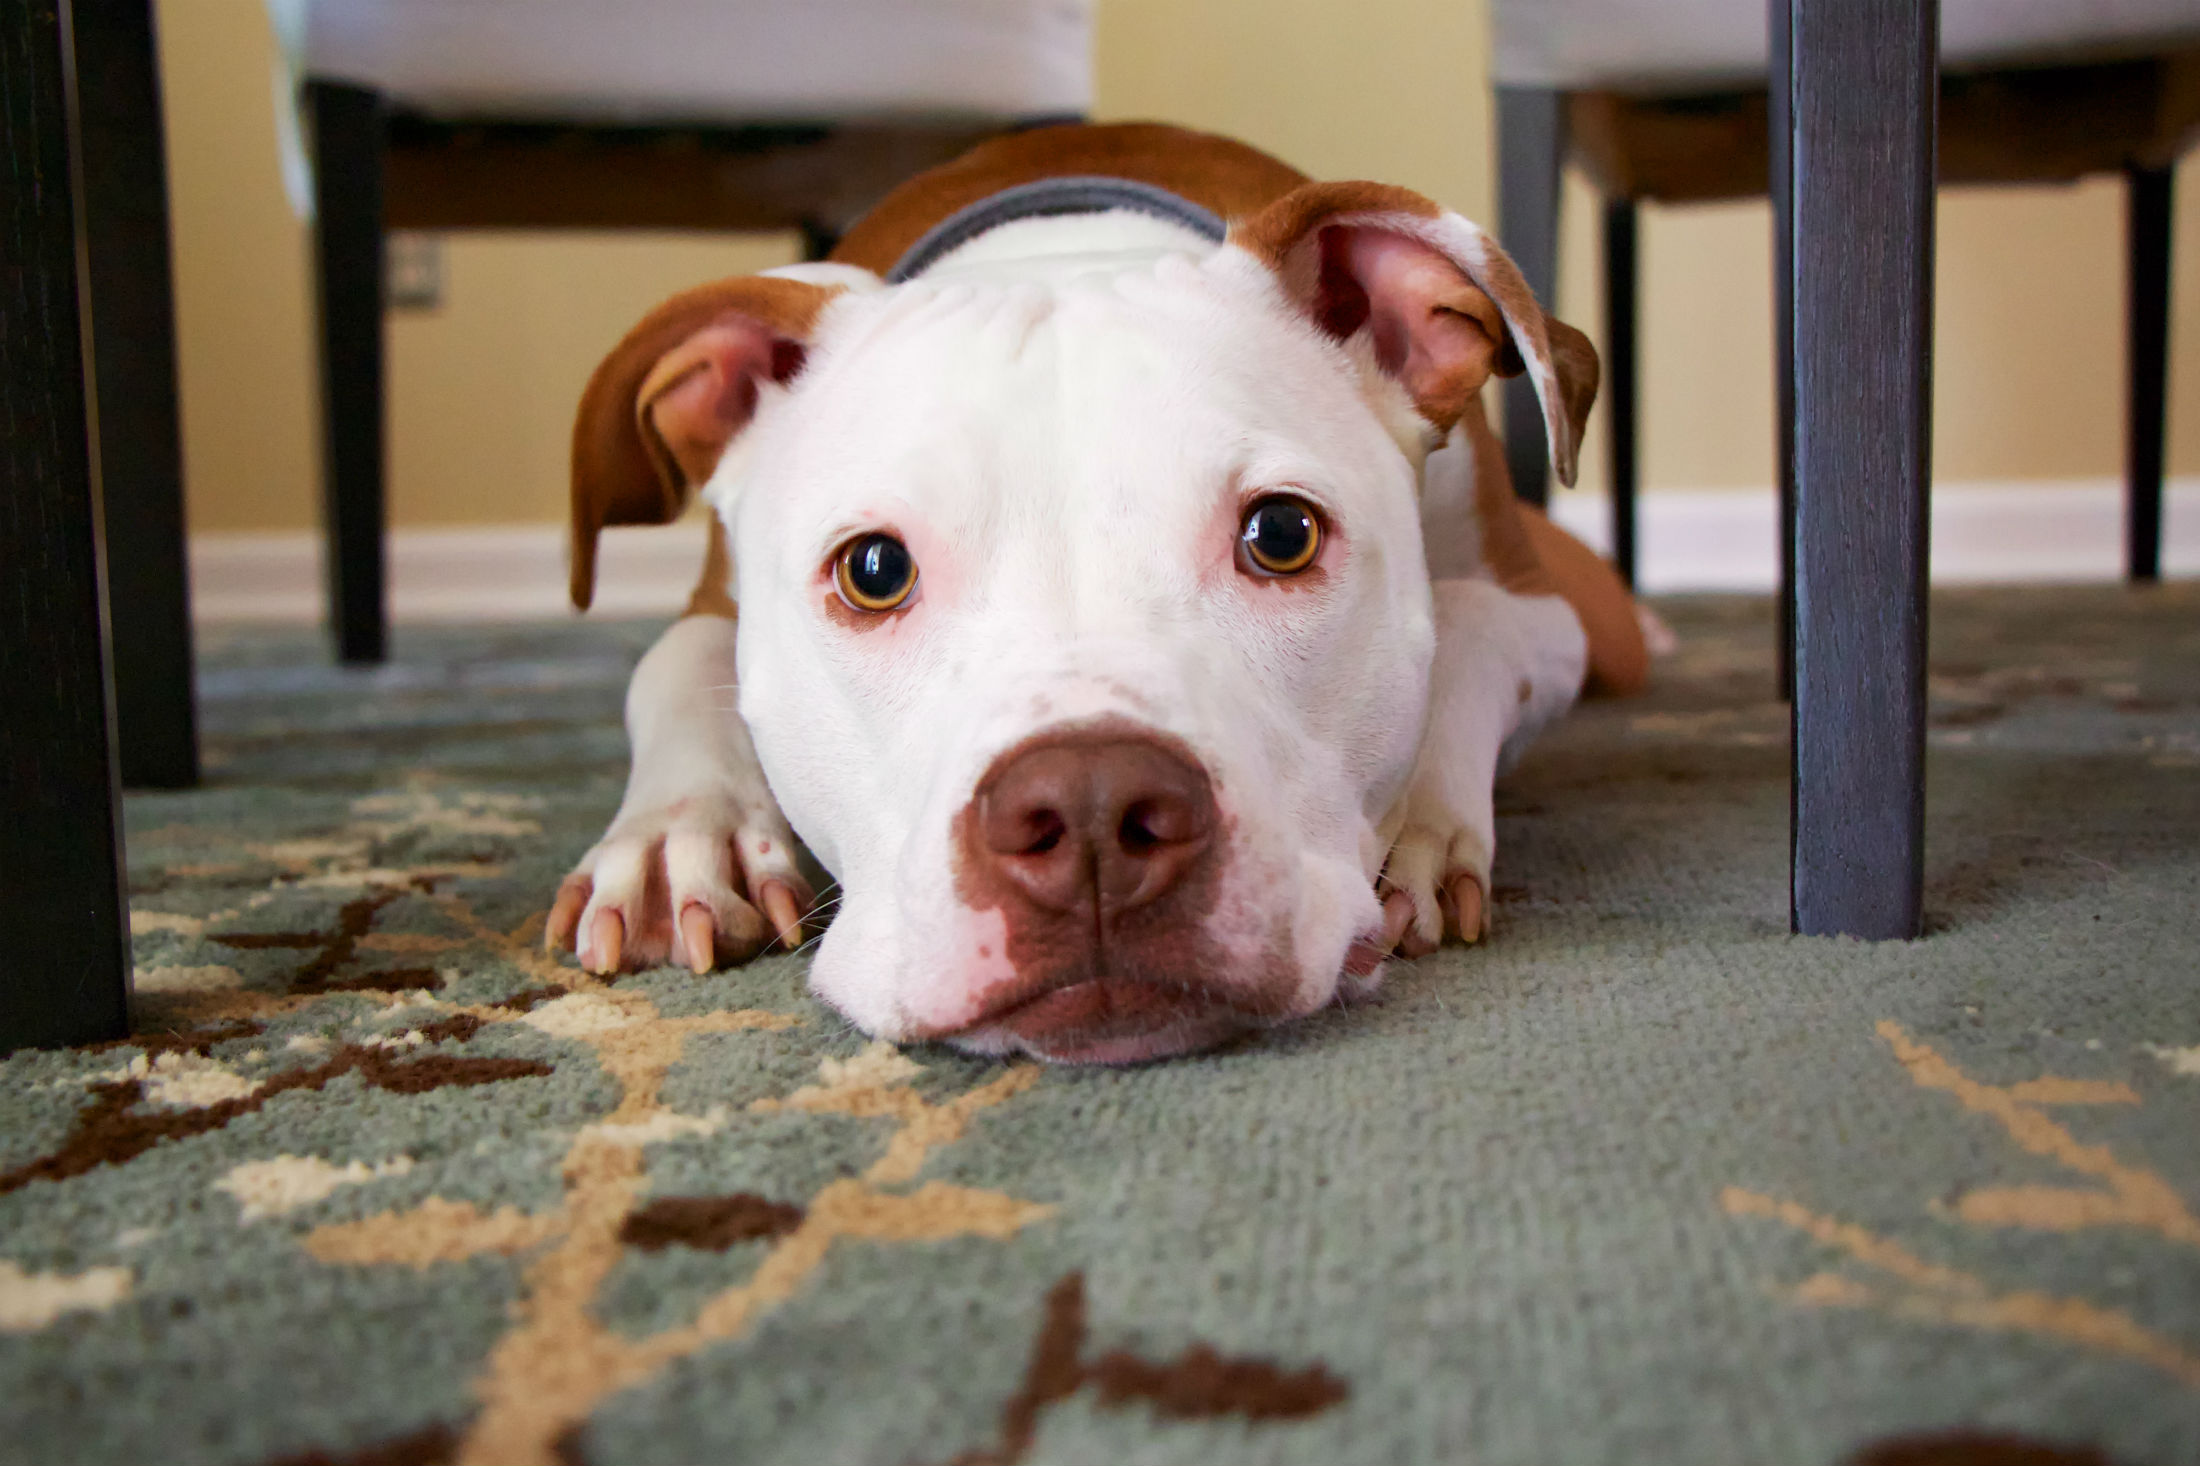 How to Clean Up Dog Mess on Carpet – Cleaning Tips